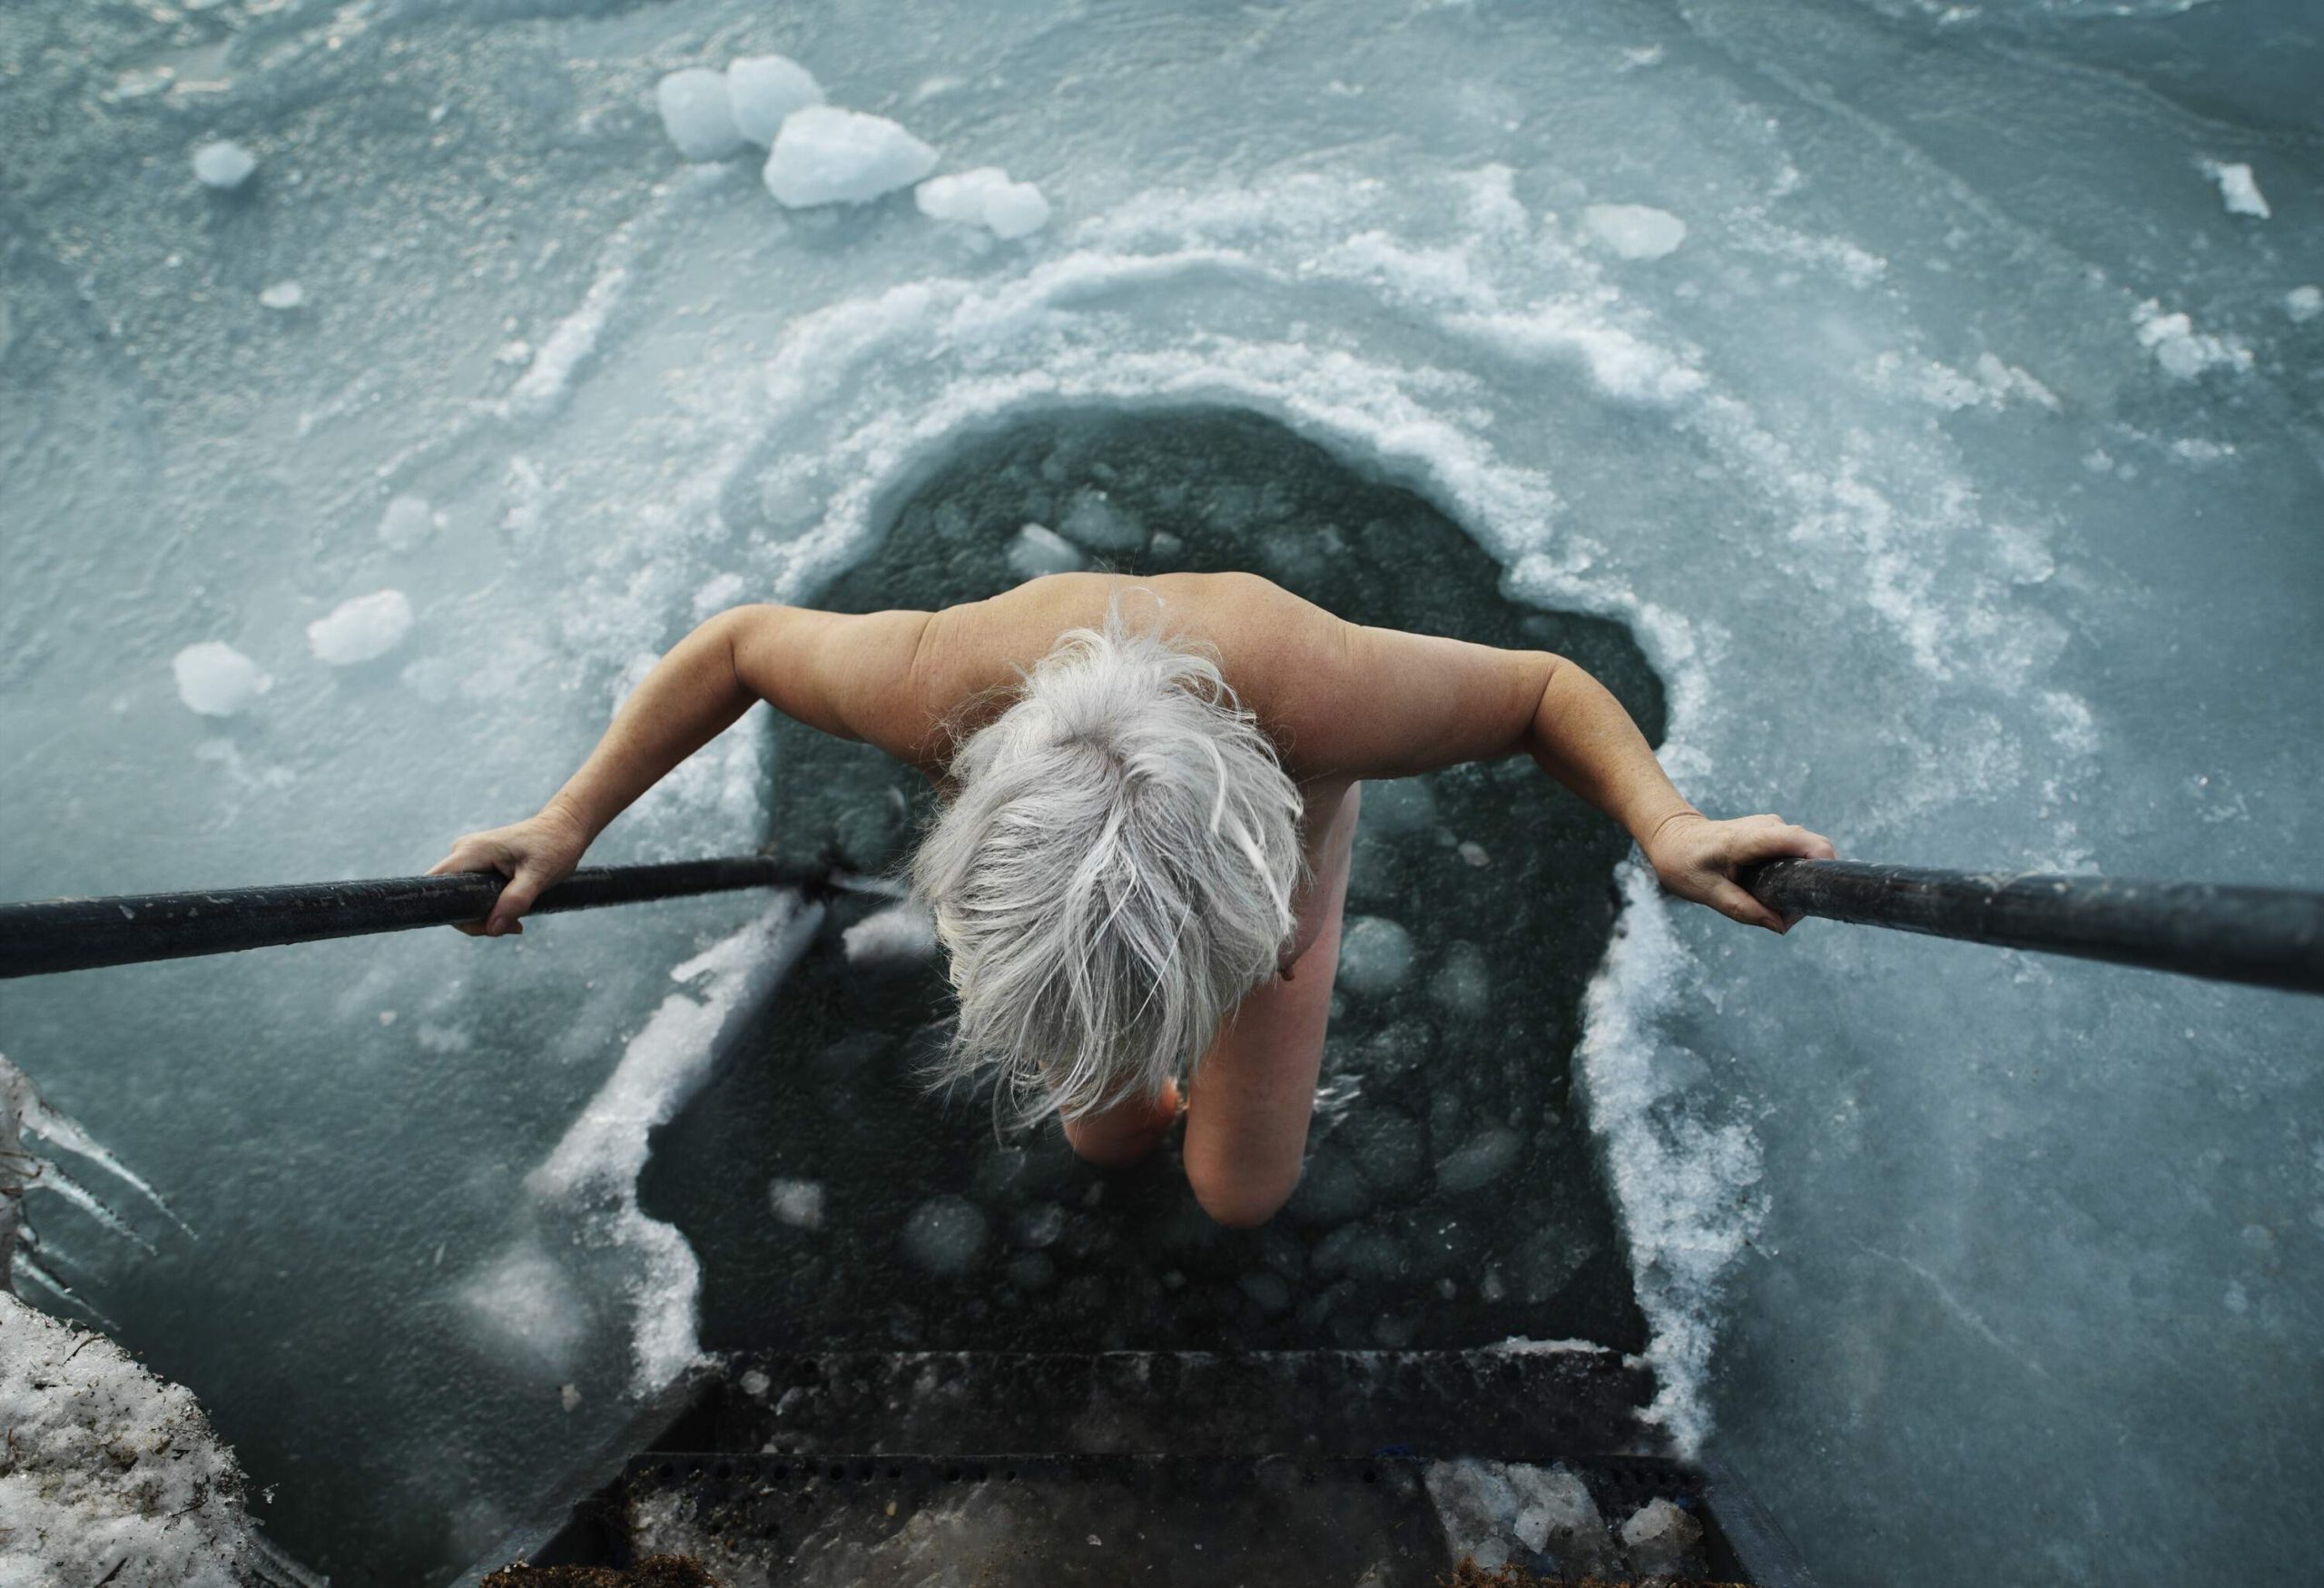 Elderly woman entering the frozen sea through a hole in the ice.